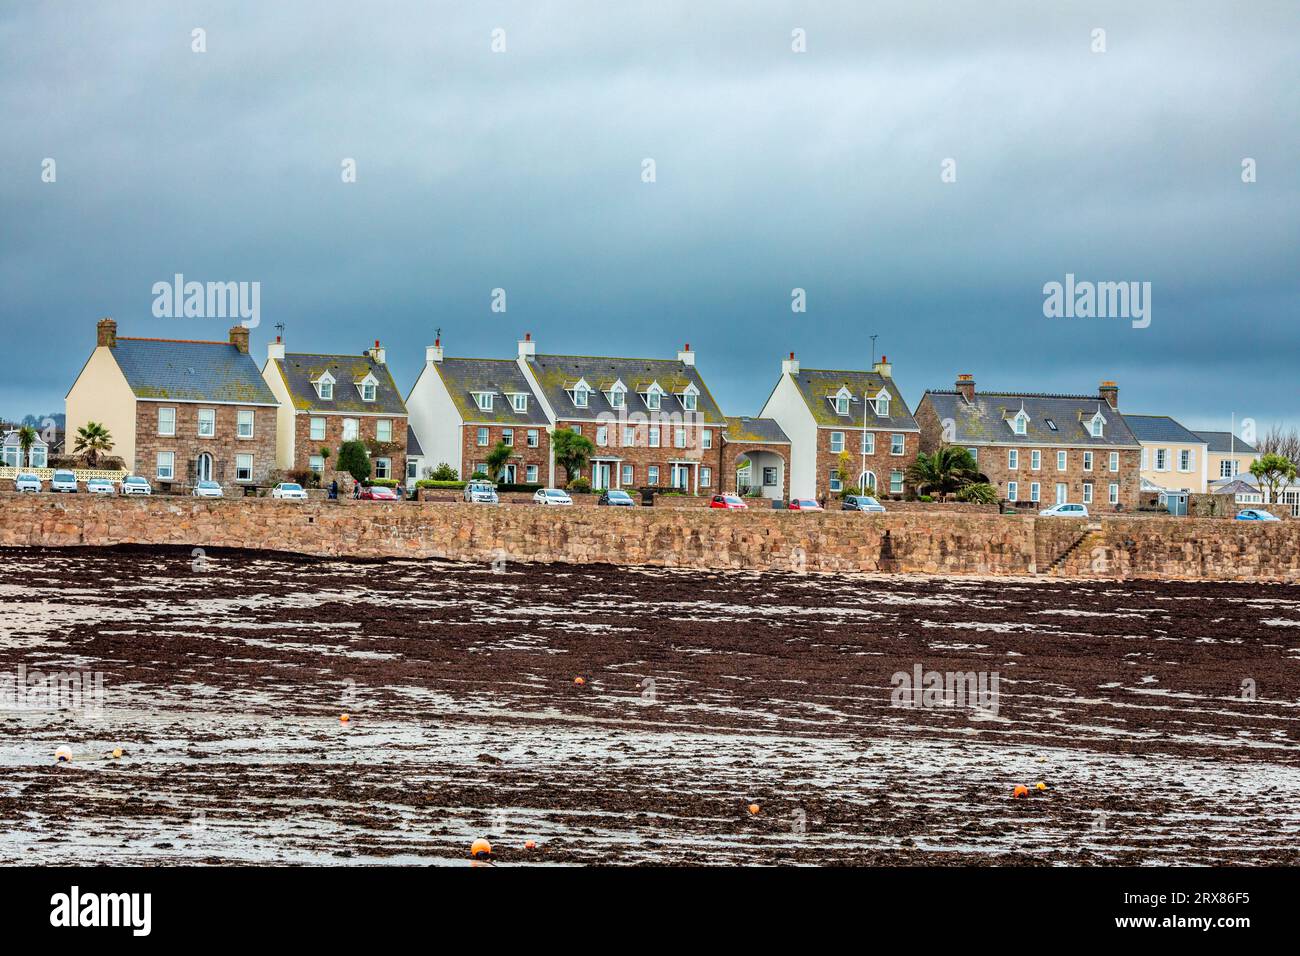 Residential houses on the La Manche seashore, in low tide bailiwick of Jersey, Channel Islands, Great Britain Stock Photo